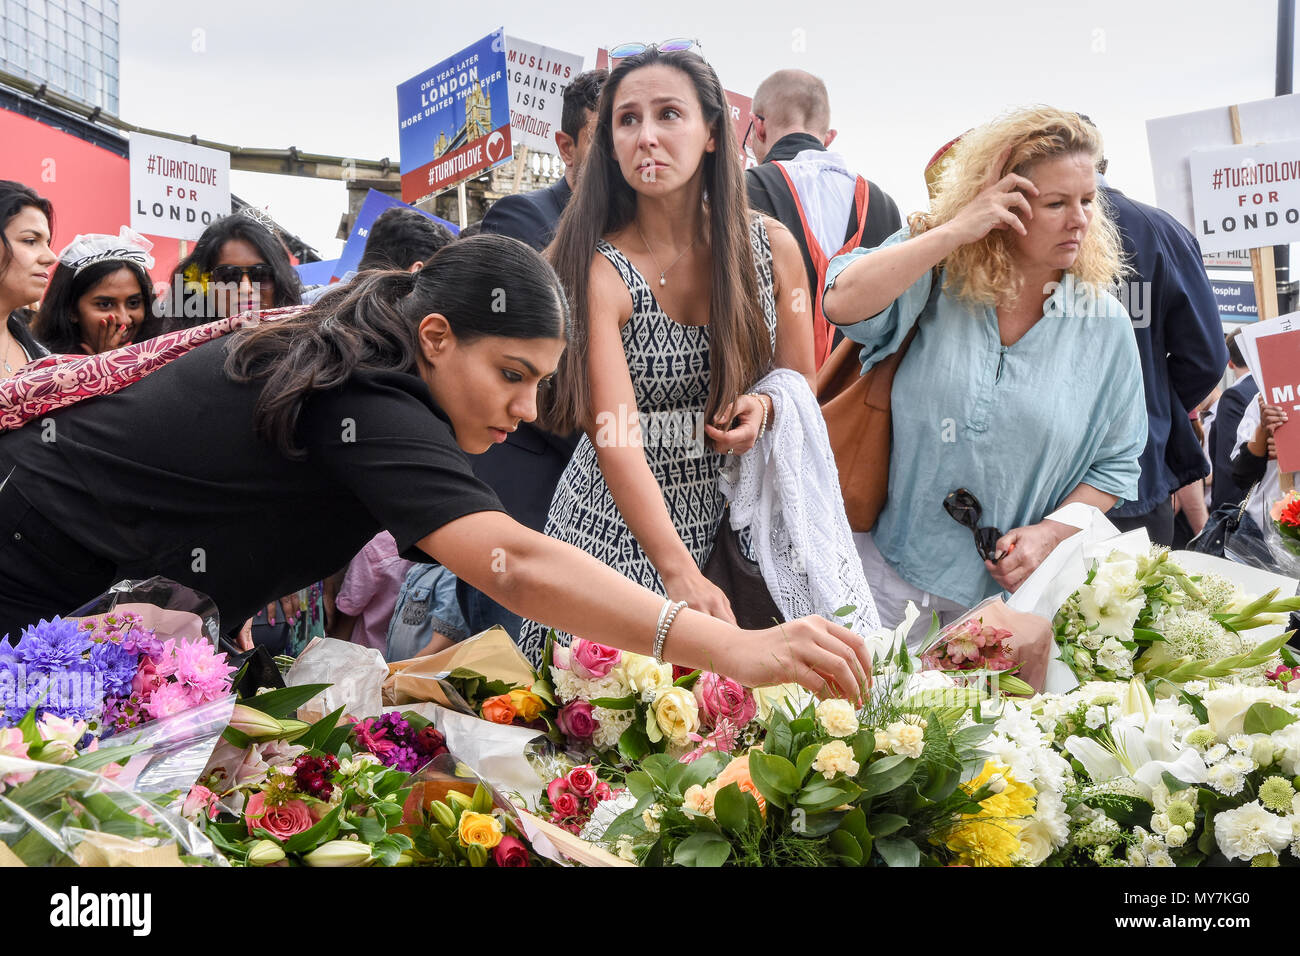 London Bridge Terror Attacks First Anniversary,Friends and relations of the deceased lay flowers in remberance,London Bridge,London.UK Stock Photo